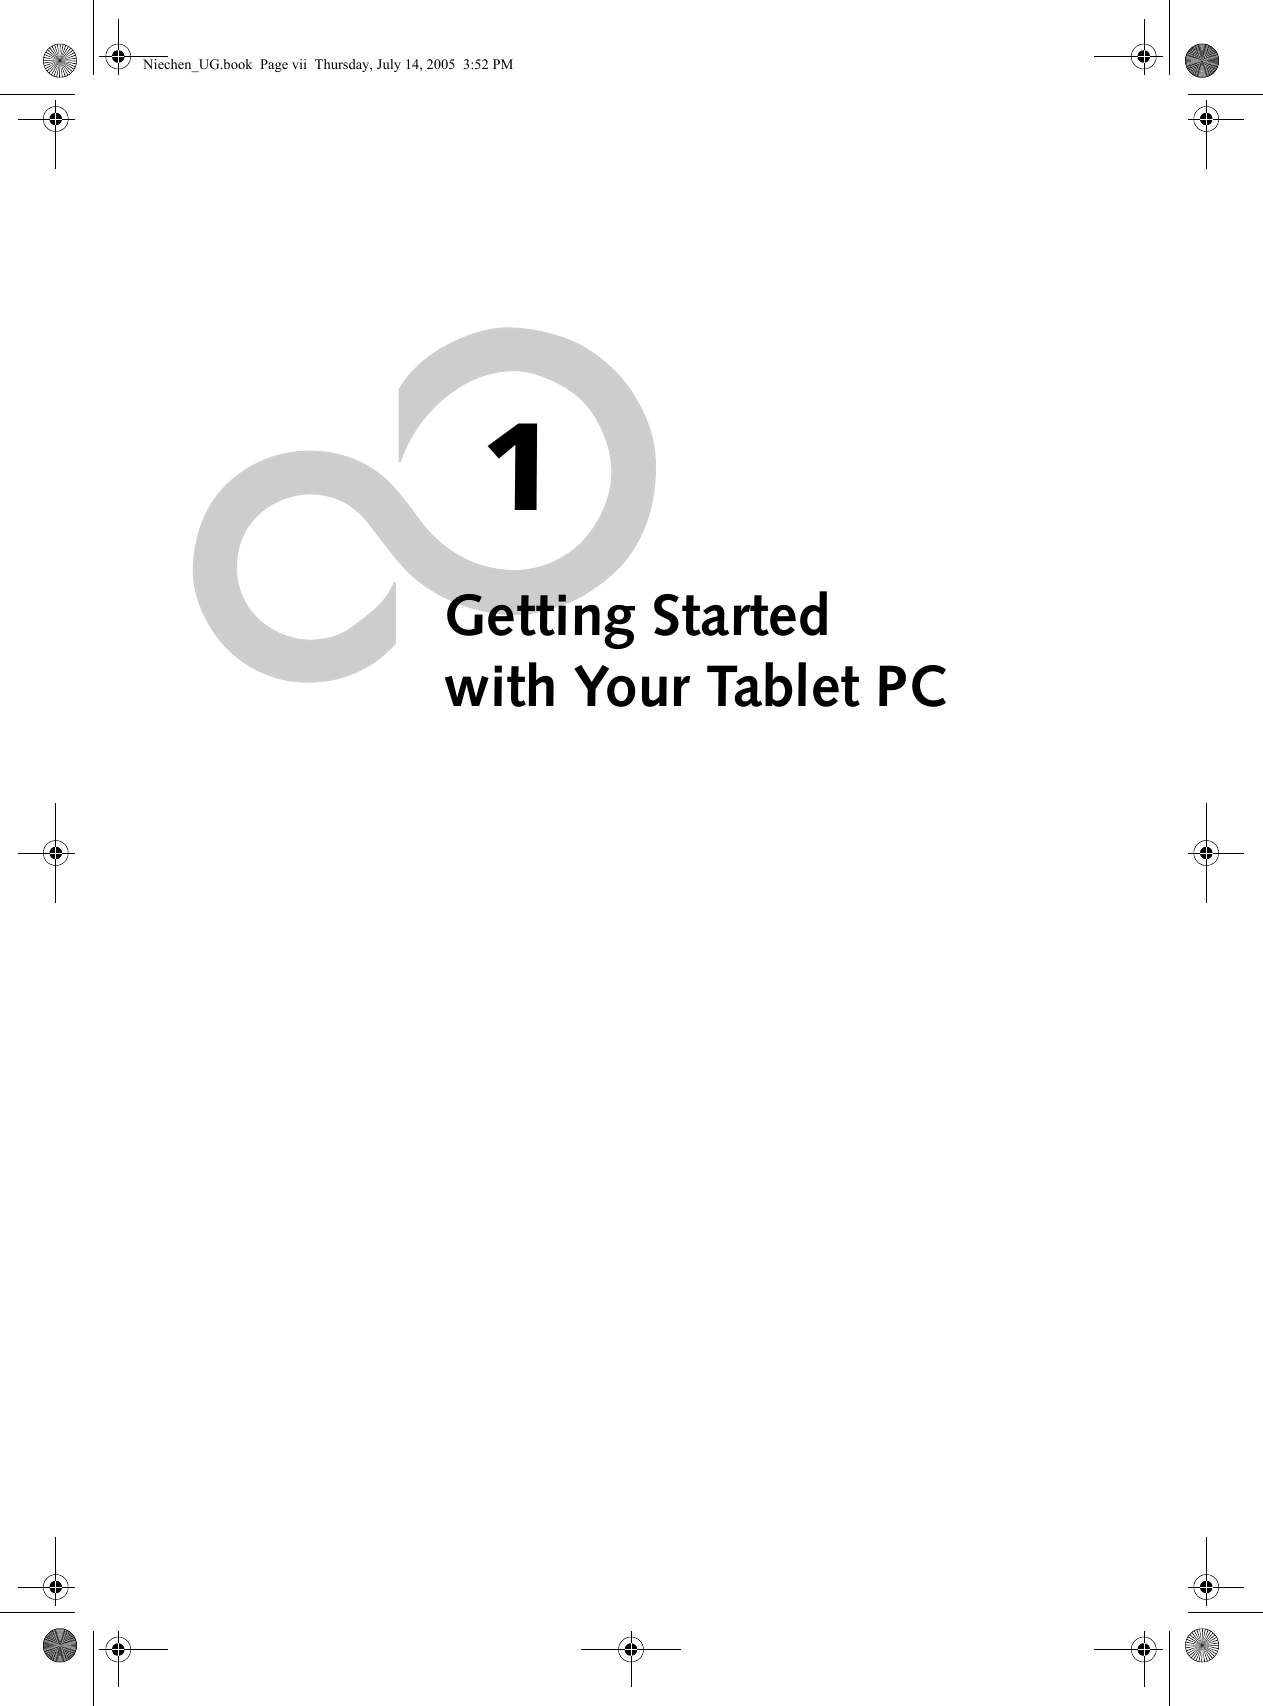 1Getting Started with Your Tablet PCNiechen_UG.book  Page vii  Thursday, July 14, 2005  3:52 PM